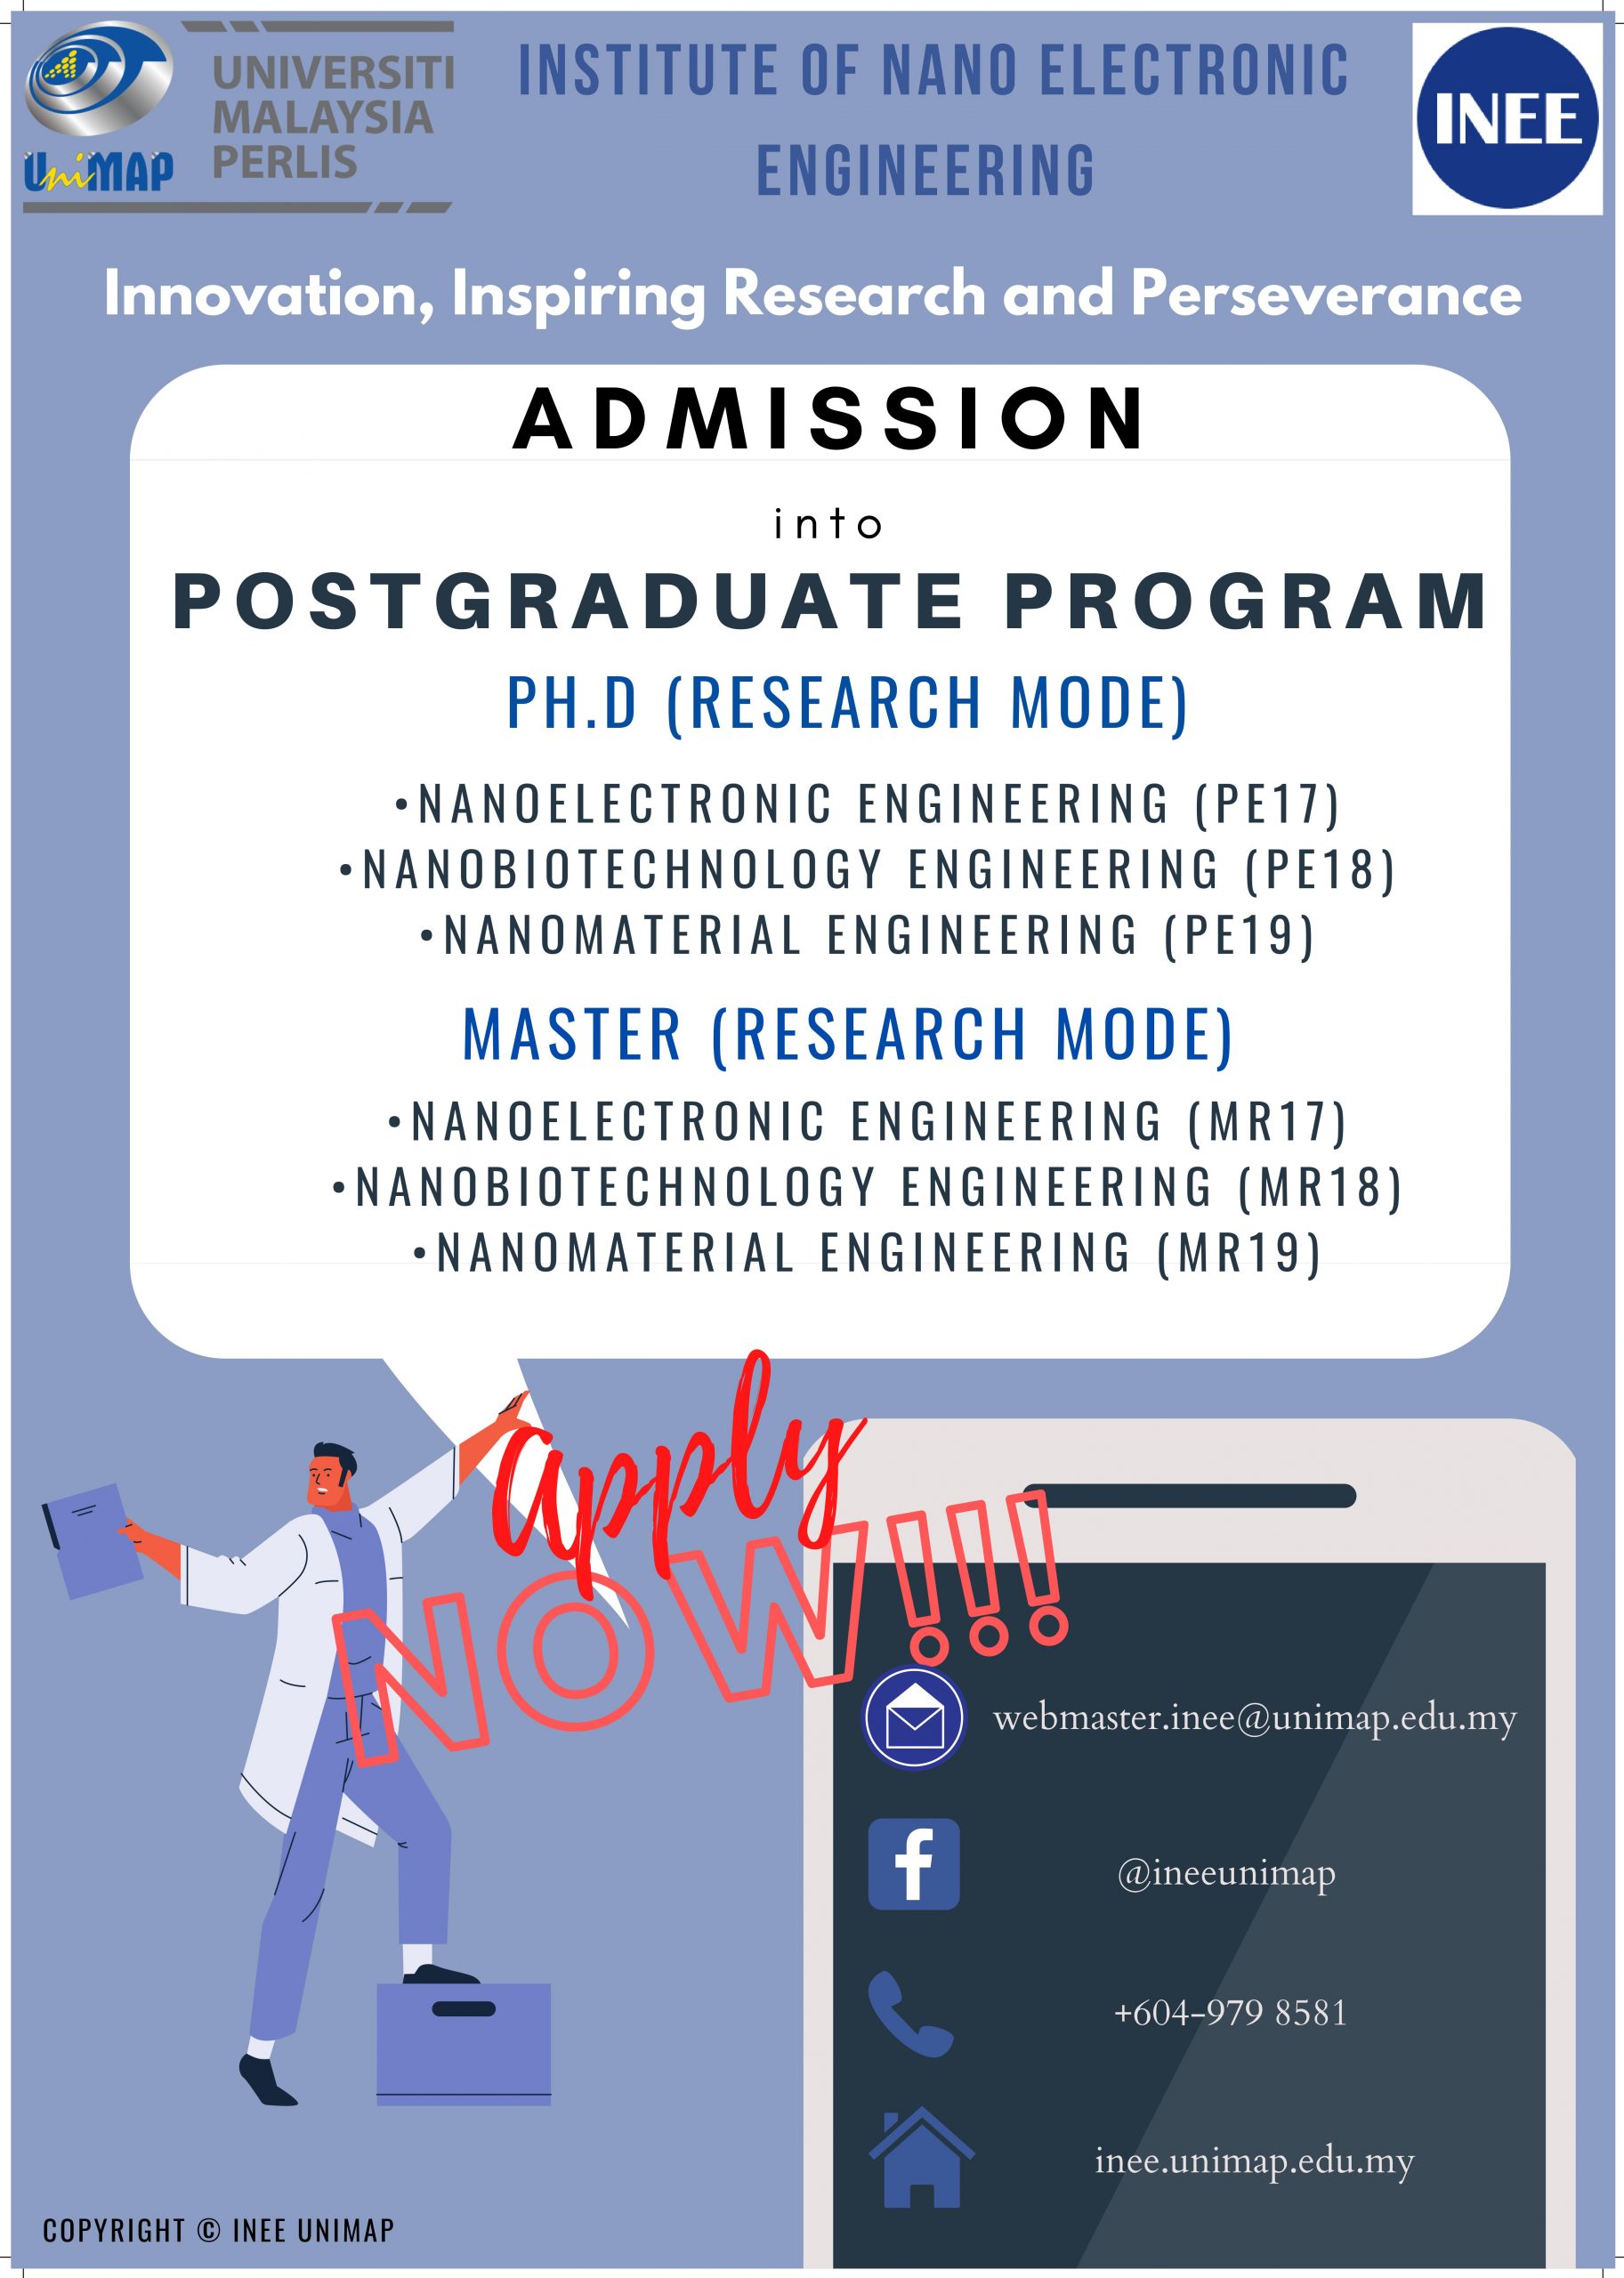 Postgraduate Program offered at Institute of Nano Electronic Engineering